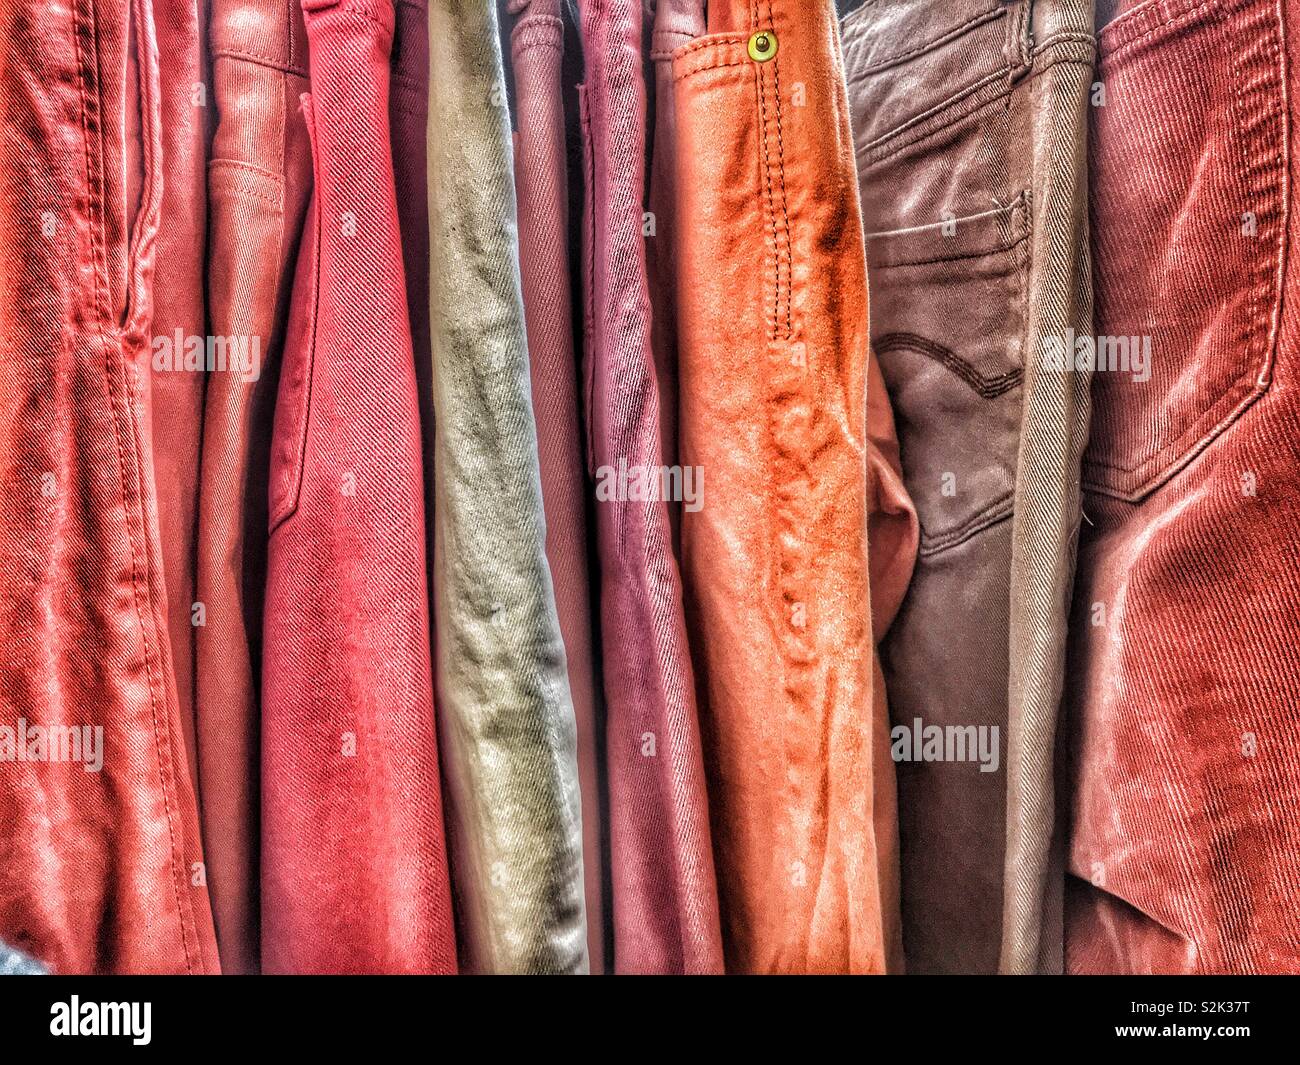 Side view of many fashionable red, brown, and orange hued jeans hanging on a clothing rack. Stock Photo